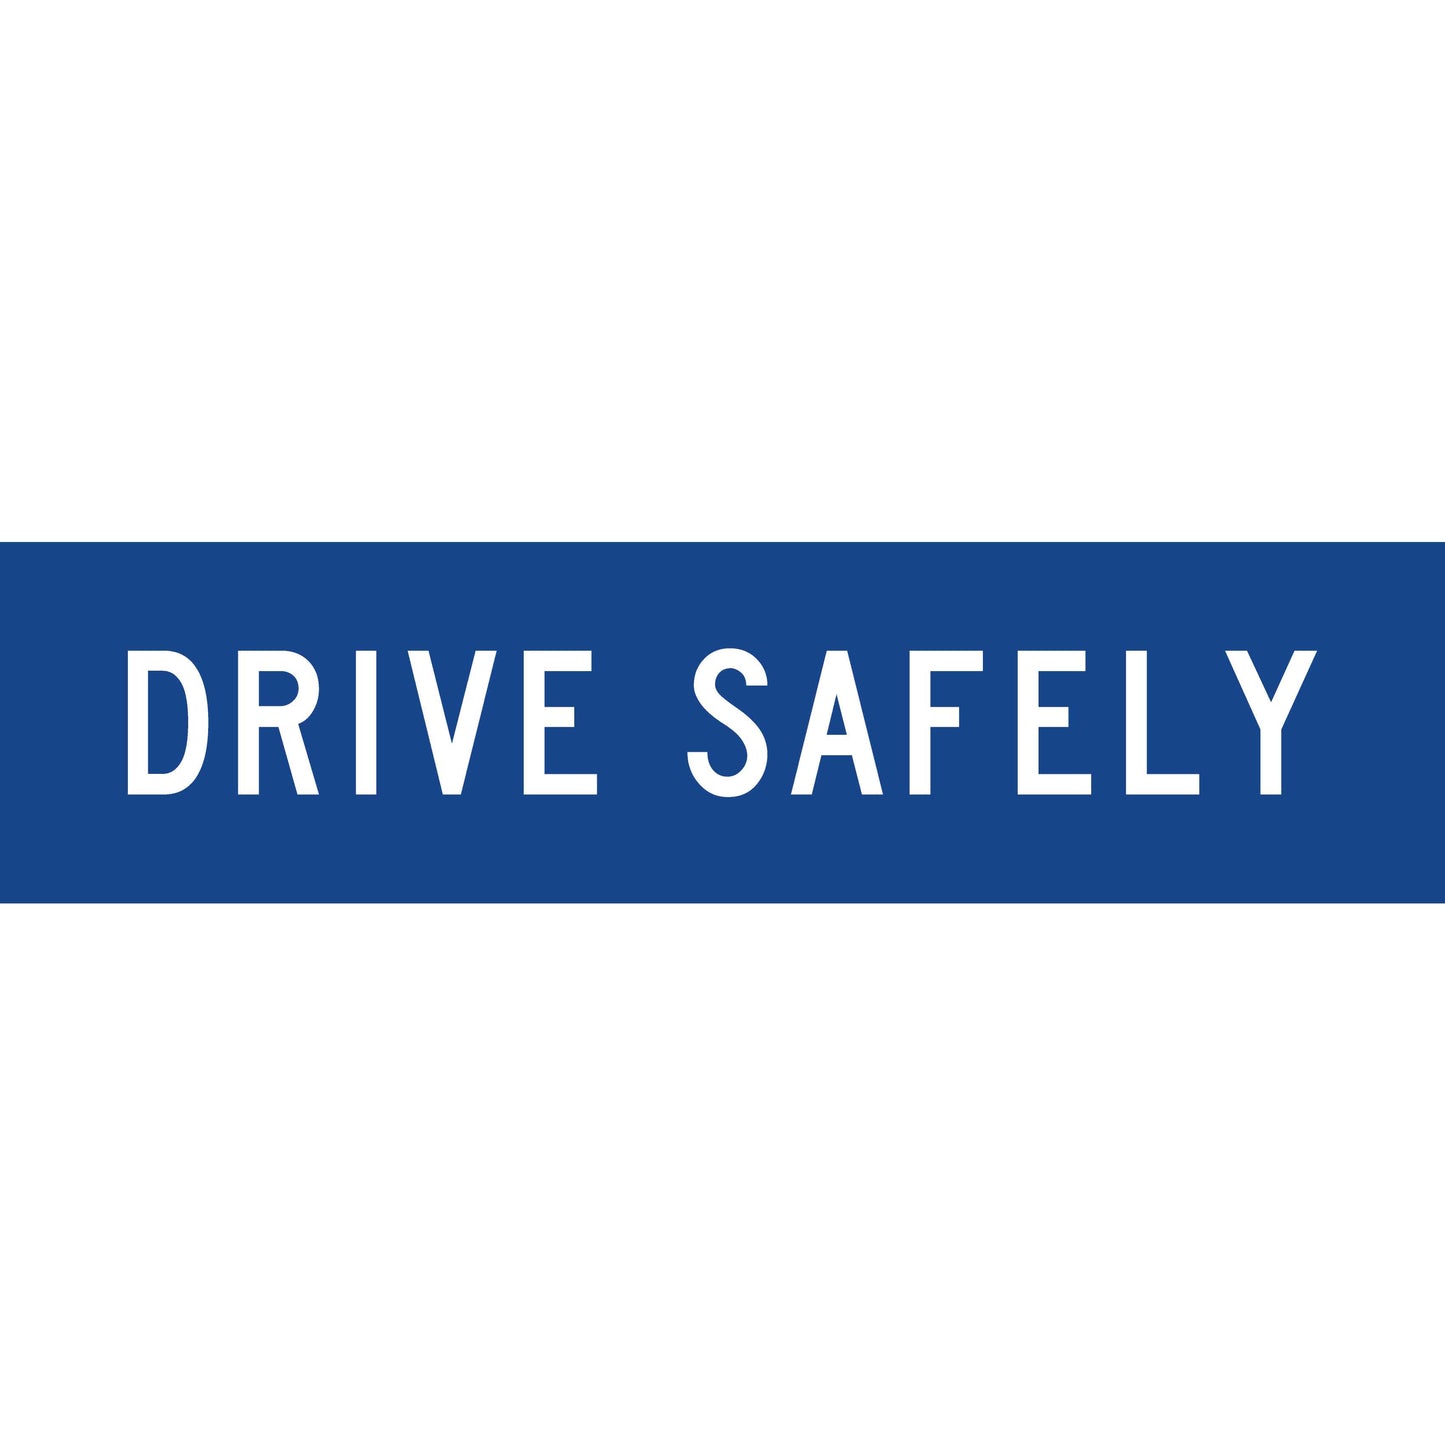 Drive Safely Blue Multi Message Reflective Traffic Sign